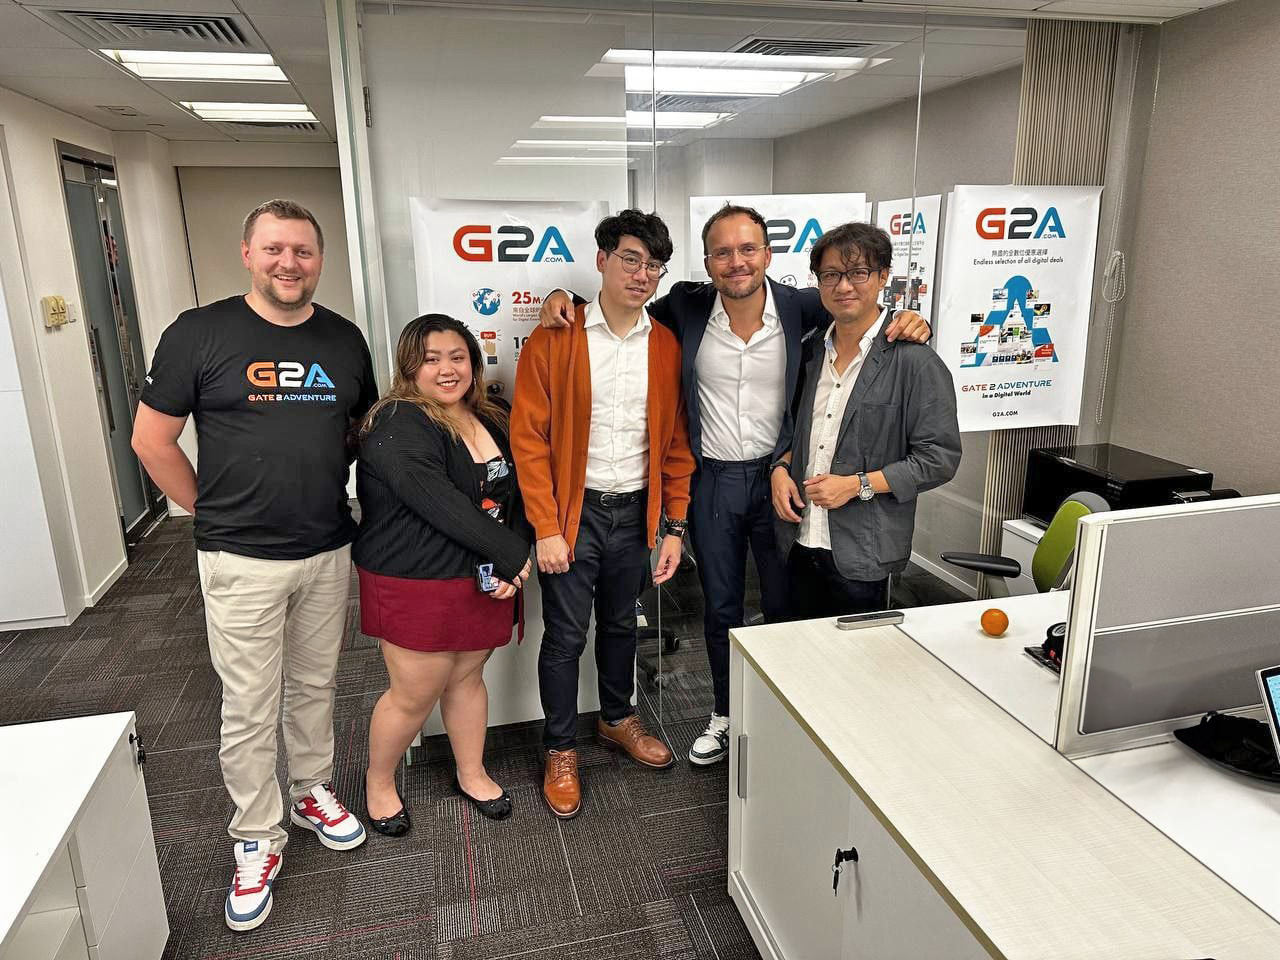 G2A.COM implements its “Gate 2 Adventure” strategy to strengthen its position as a global digital entertainment platform.